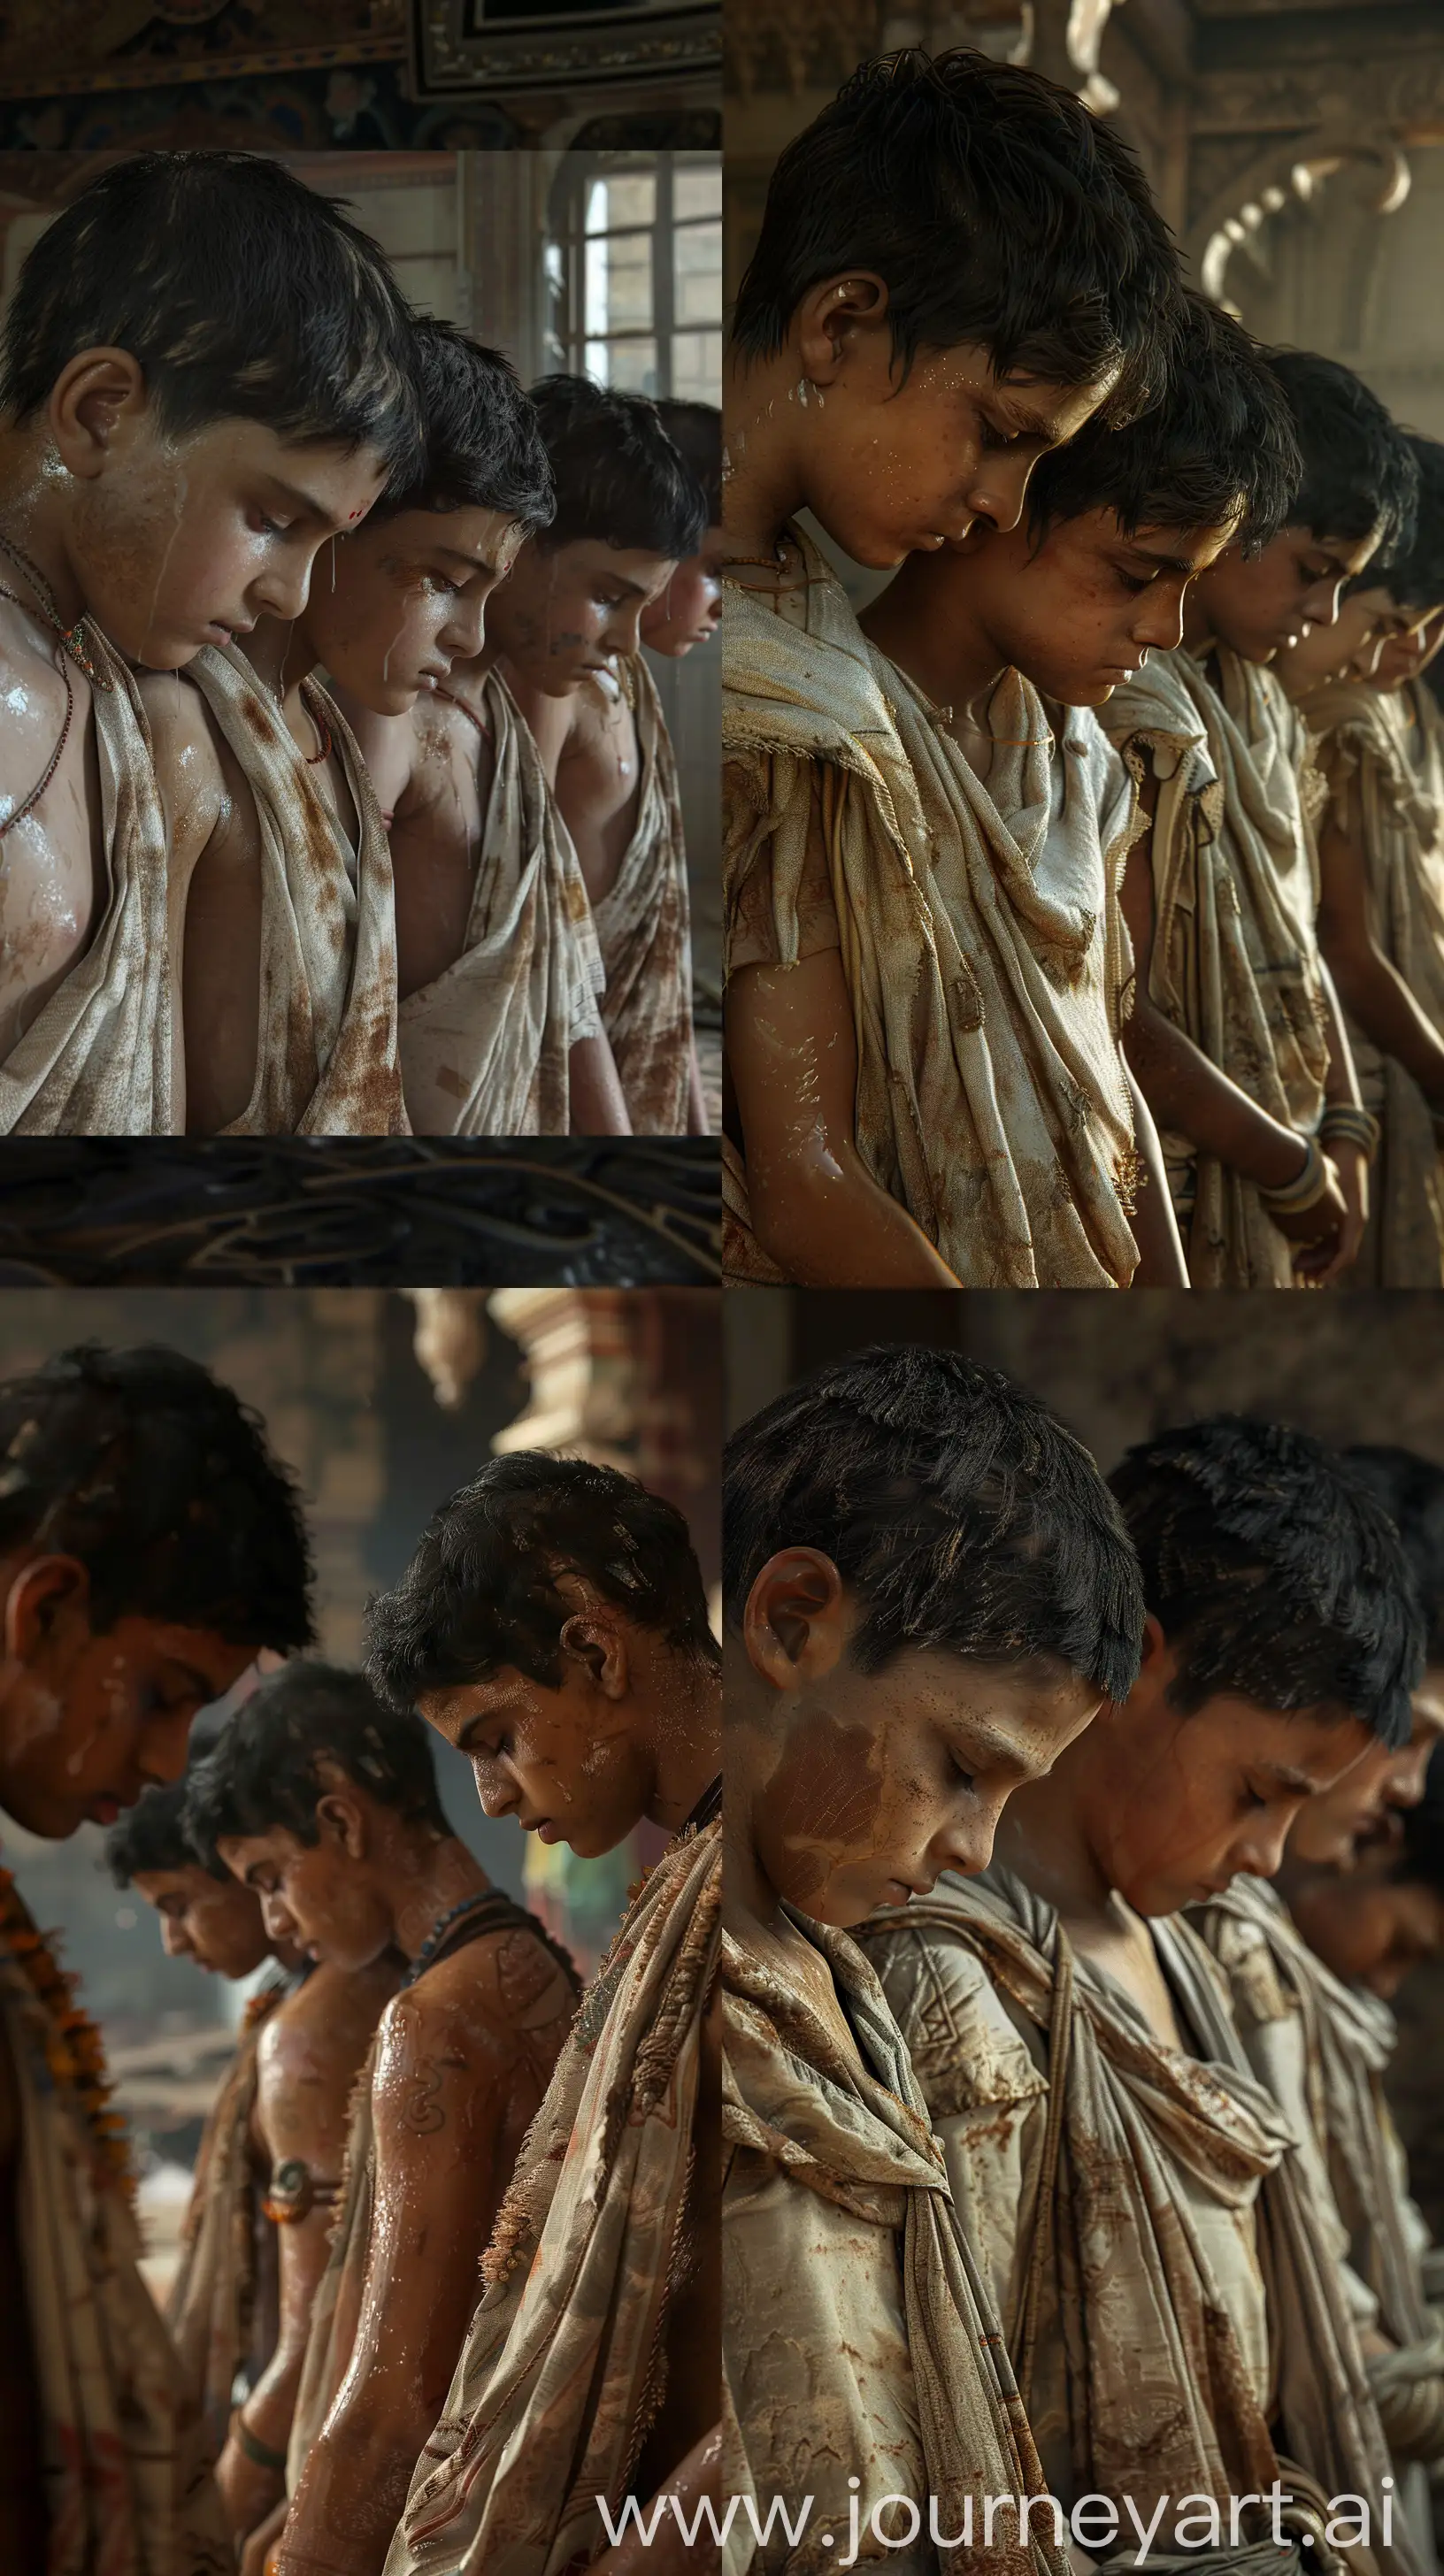 Ancient-Indian-Boys-in-Humble-Clothing-in-Indoor-Setting